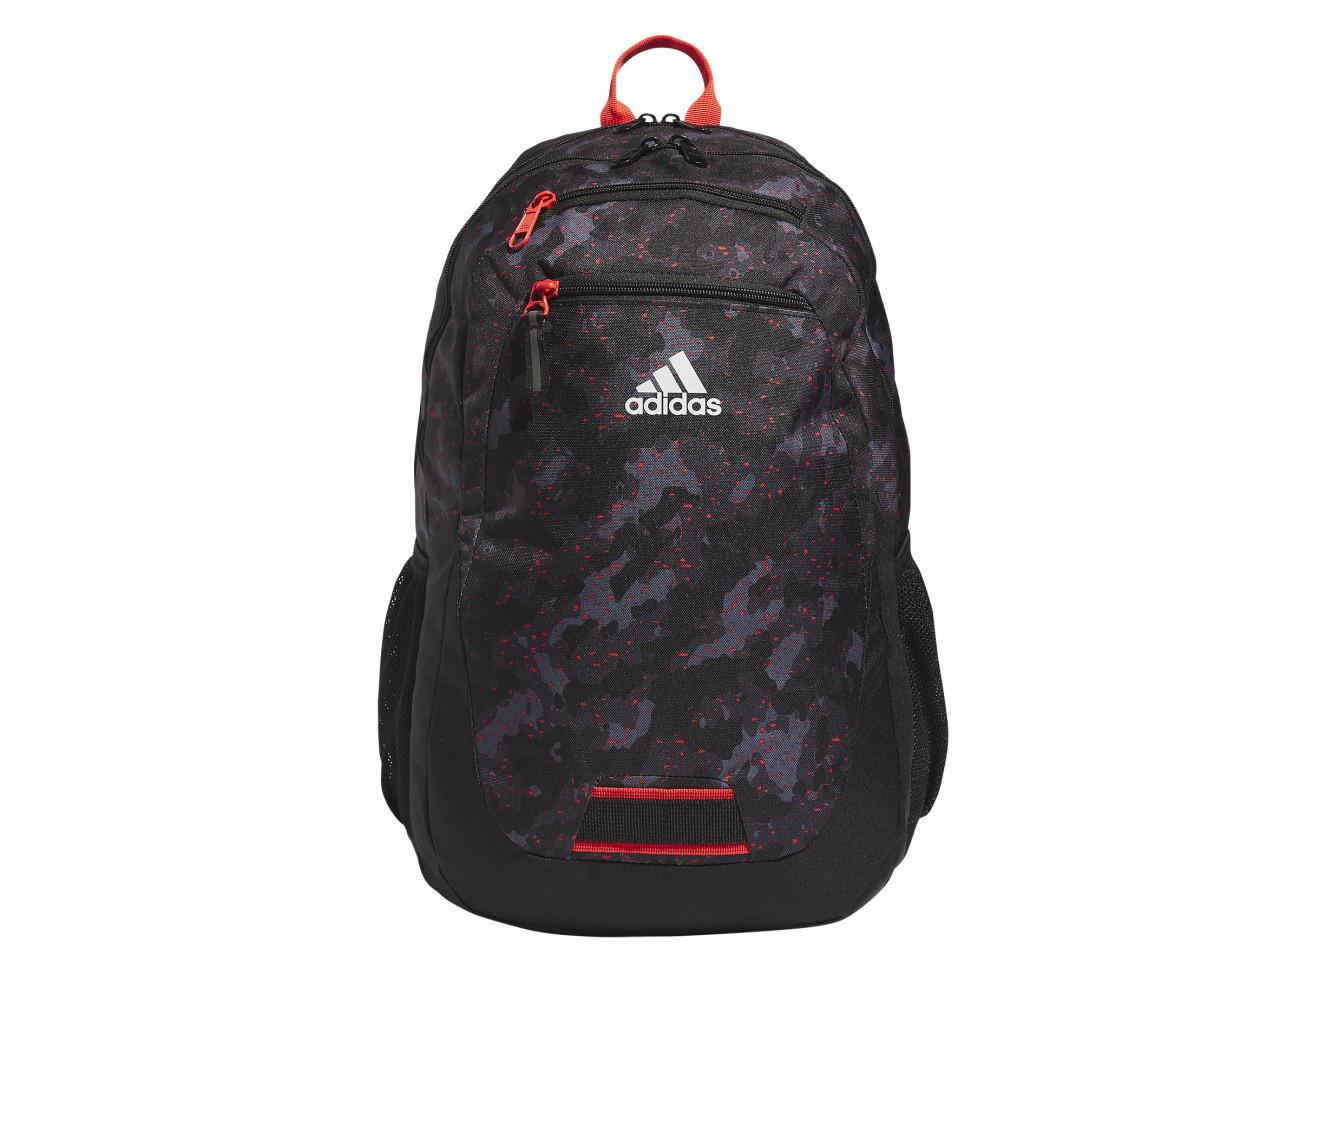 Pengeudlån Pludselig nedstigning lysere Adidas Backpacks & Lunch Boxes, Book Bags | Shoe Carnival